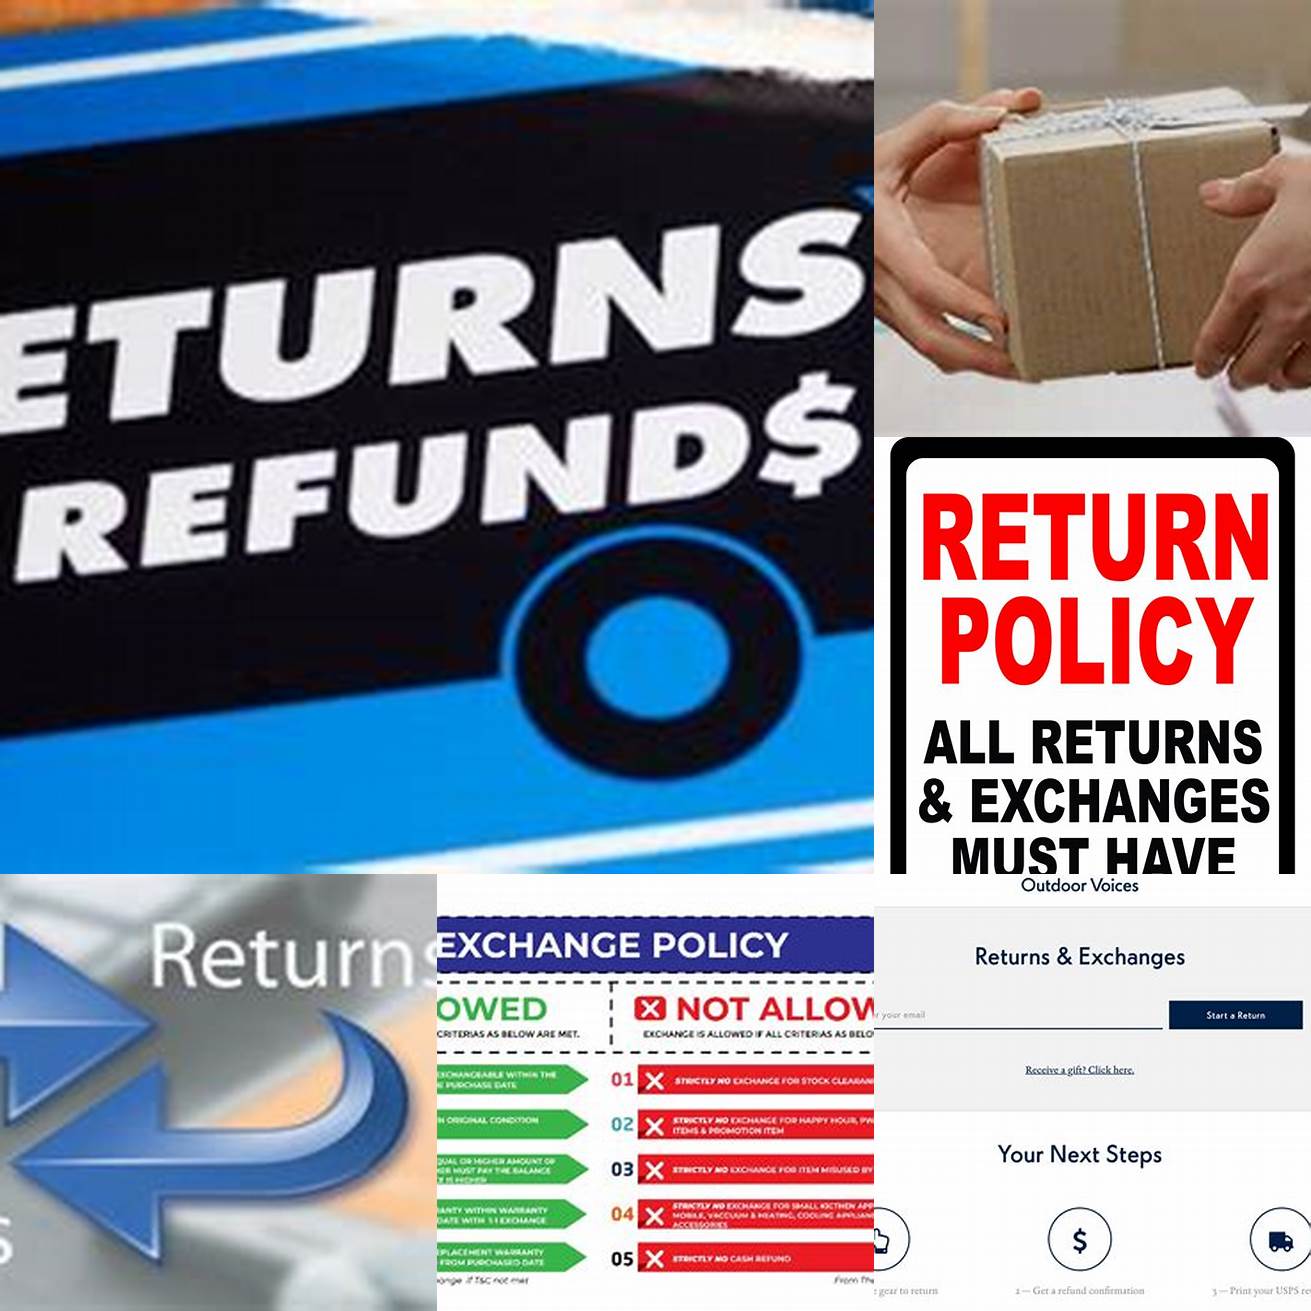 Check the return and exchange policies